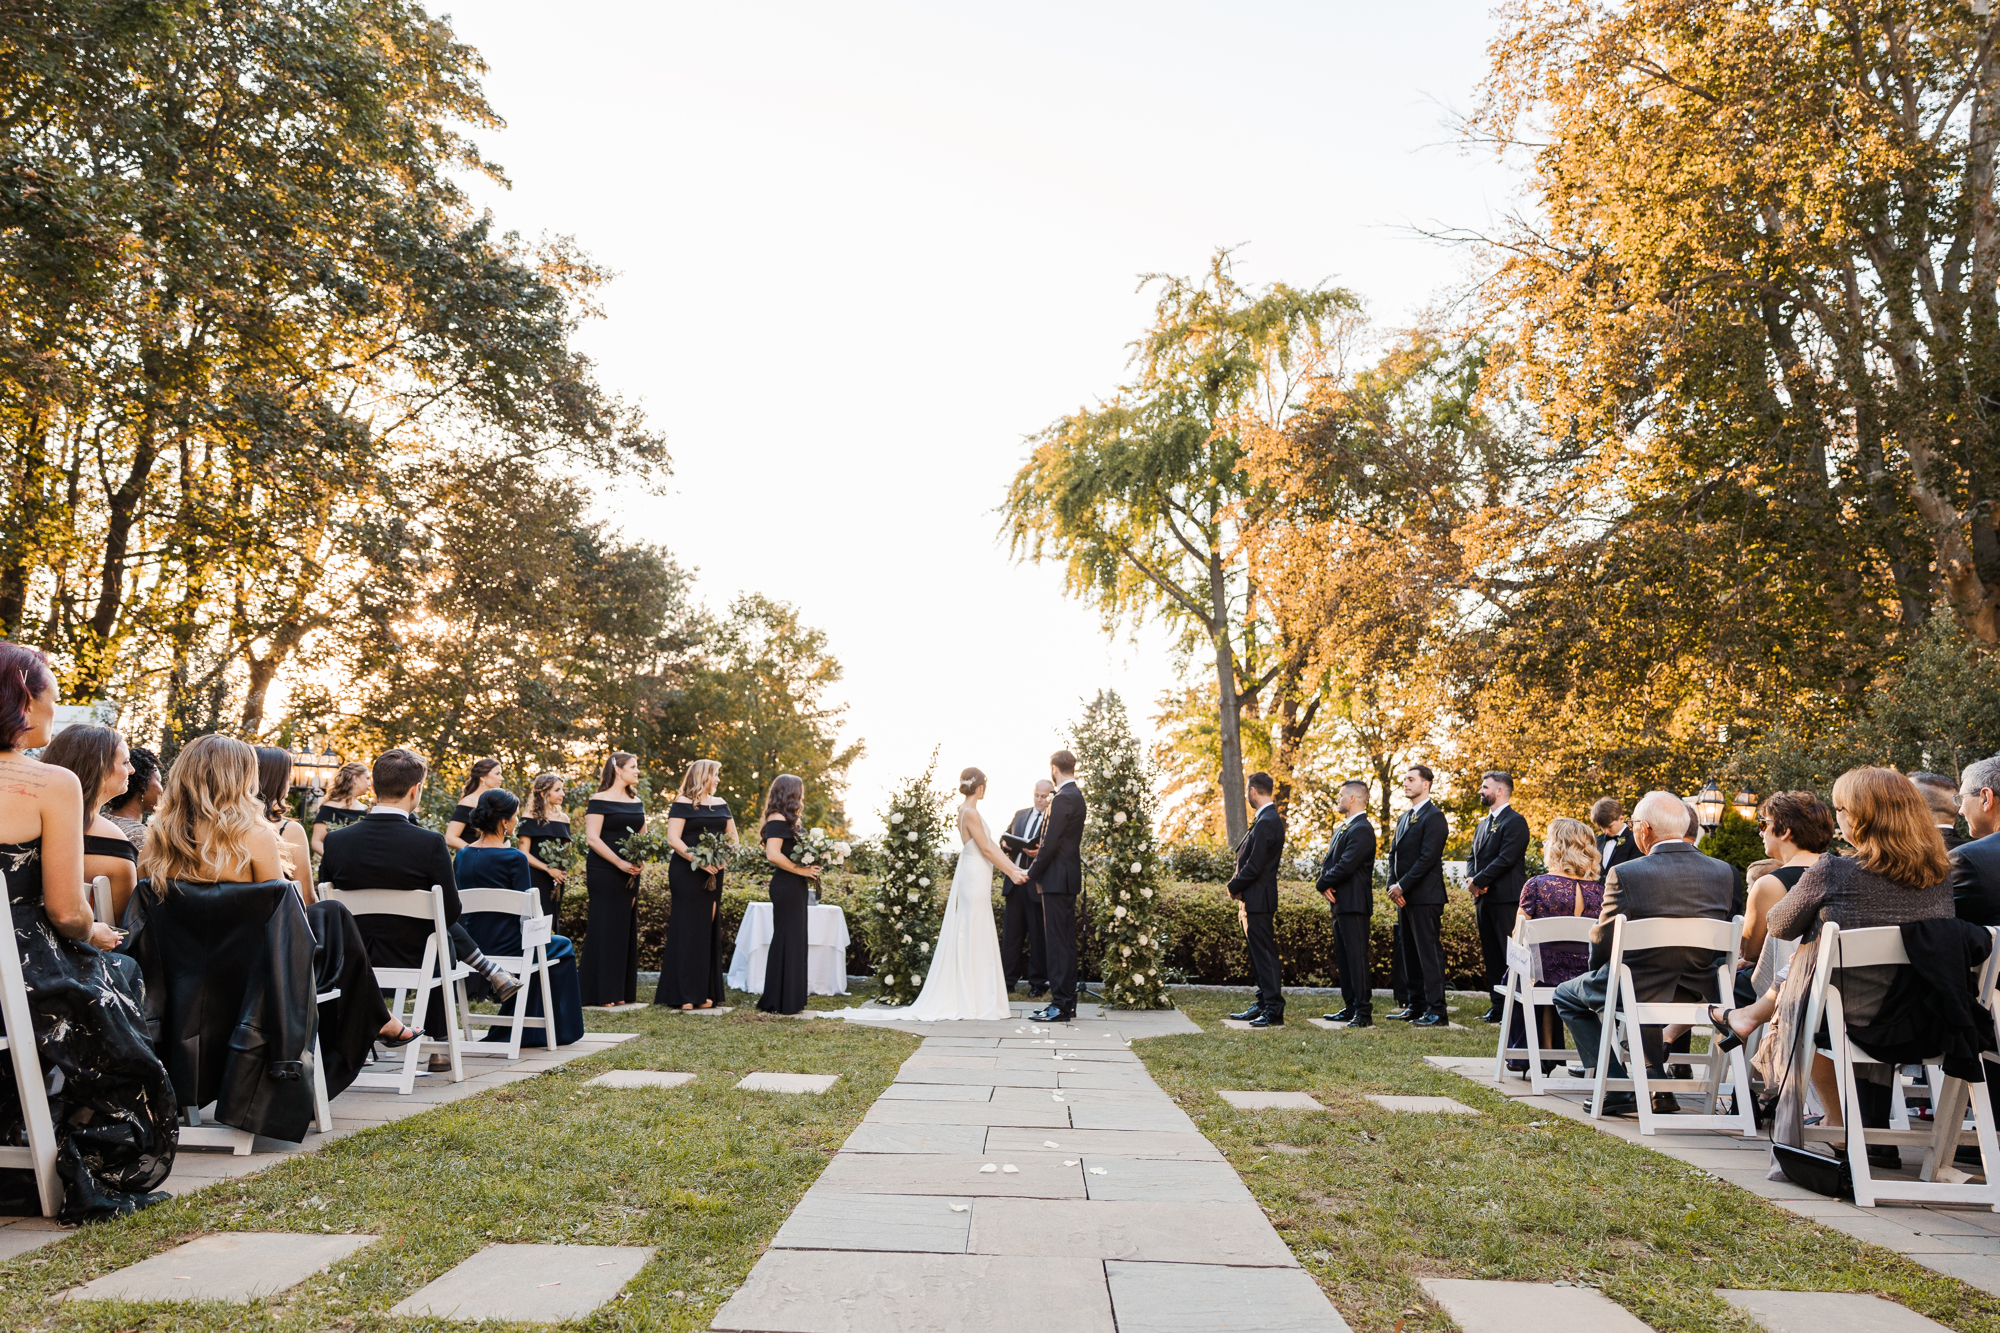 Dreamy Sunset Briarcliff Manor Wedding Photos in Autumn in Hudson Valley